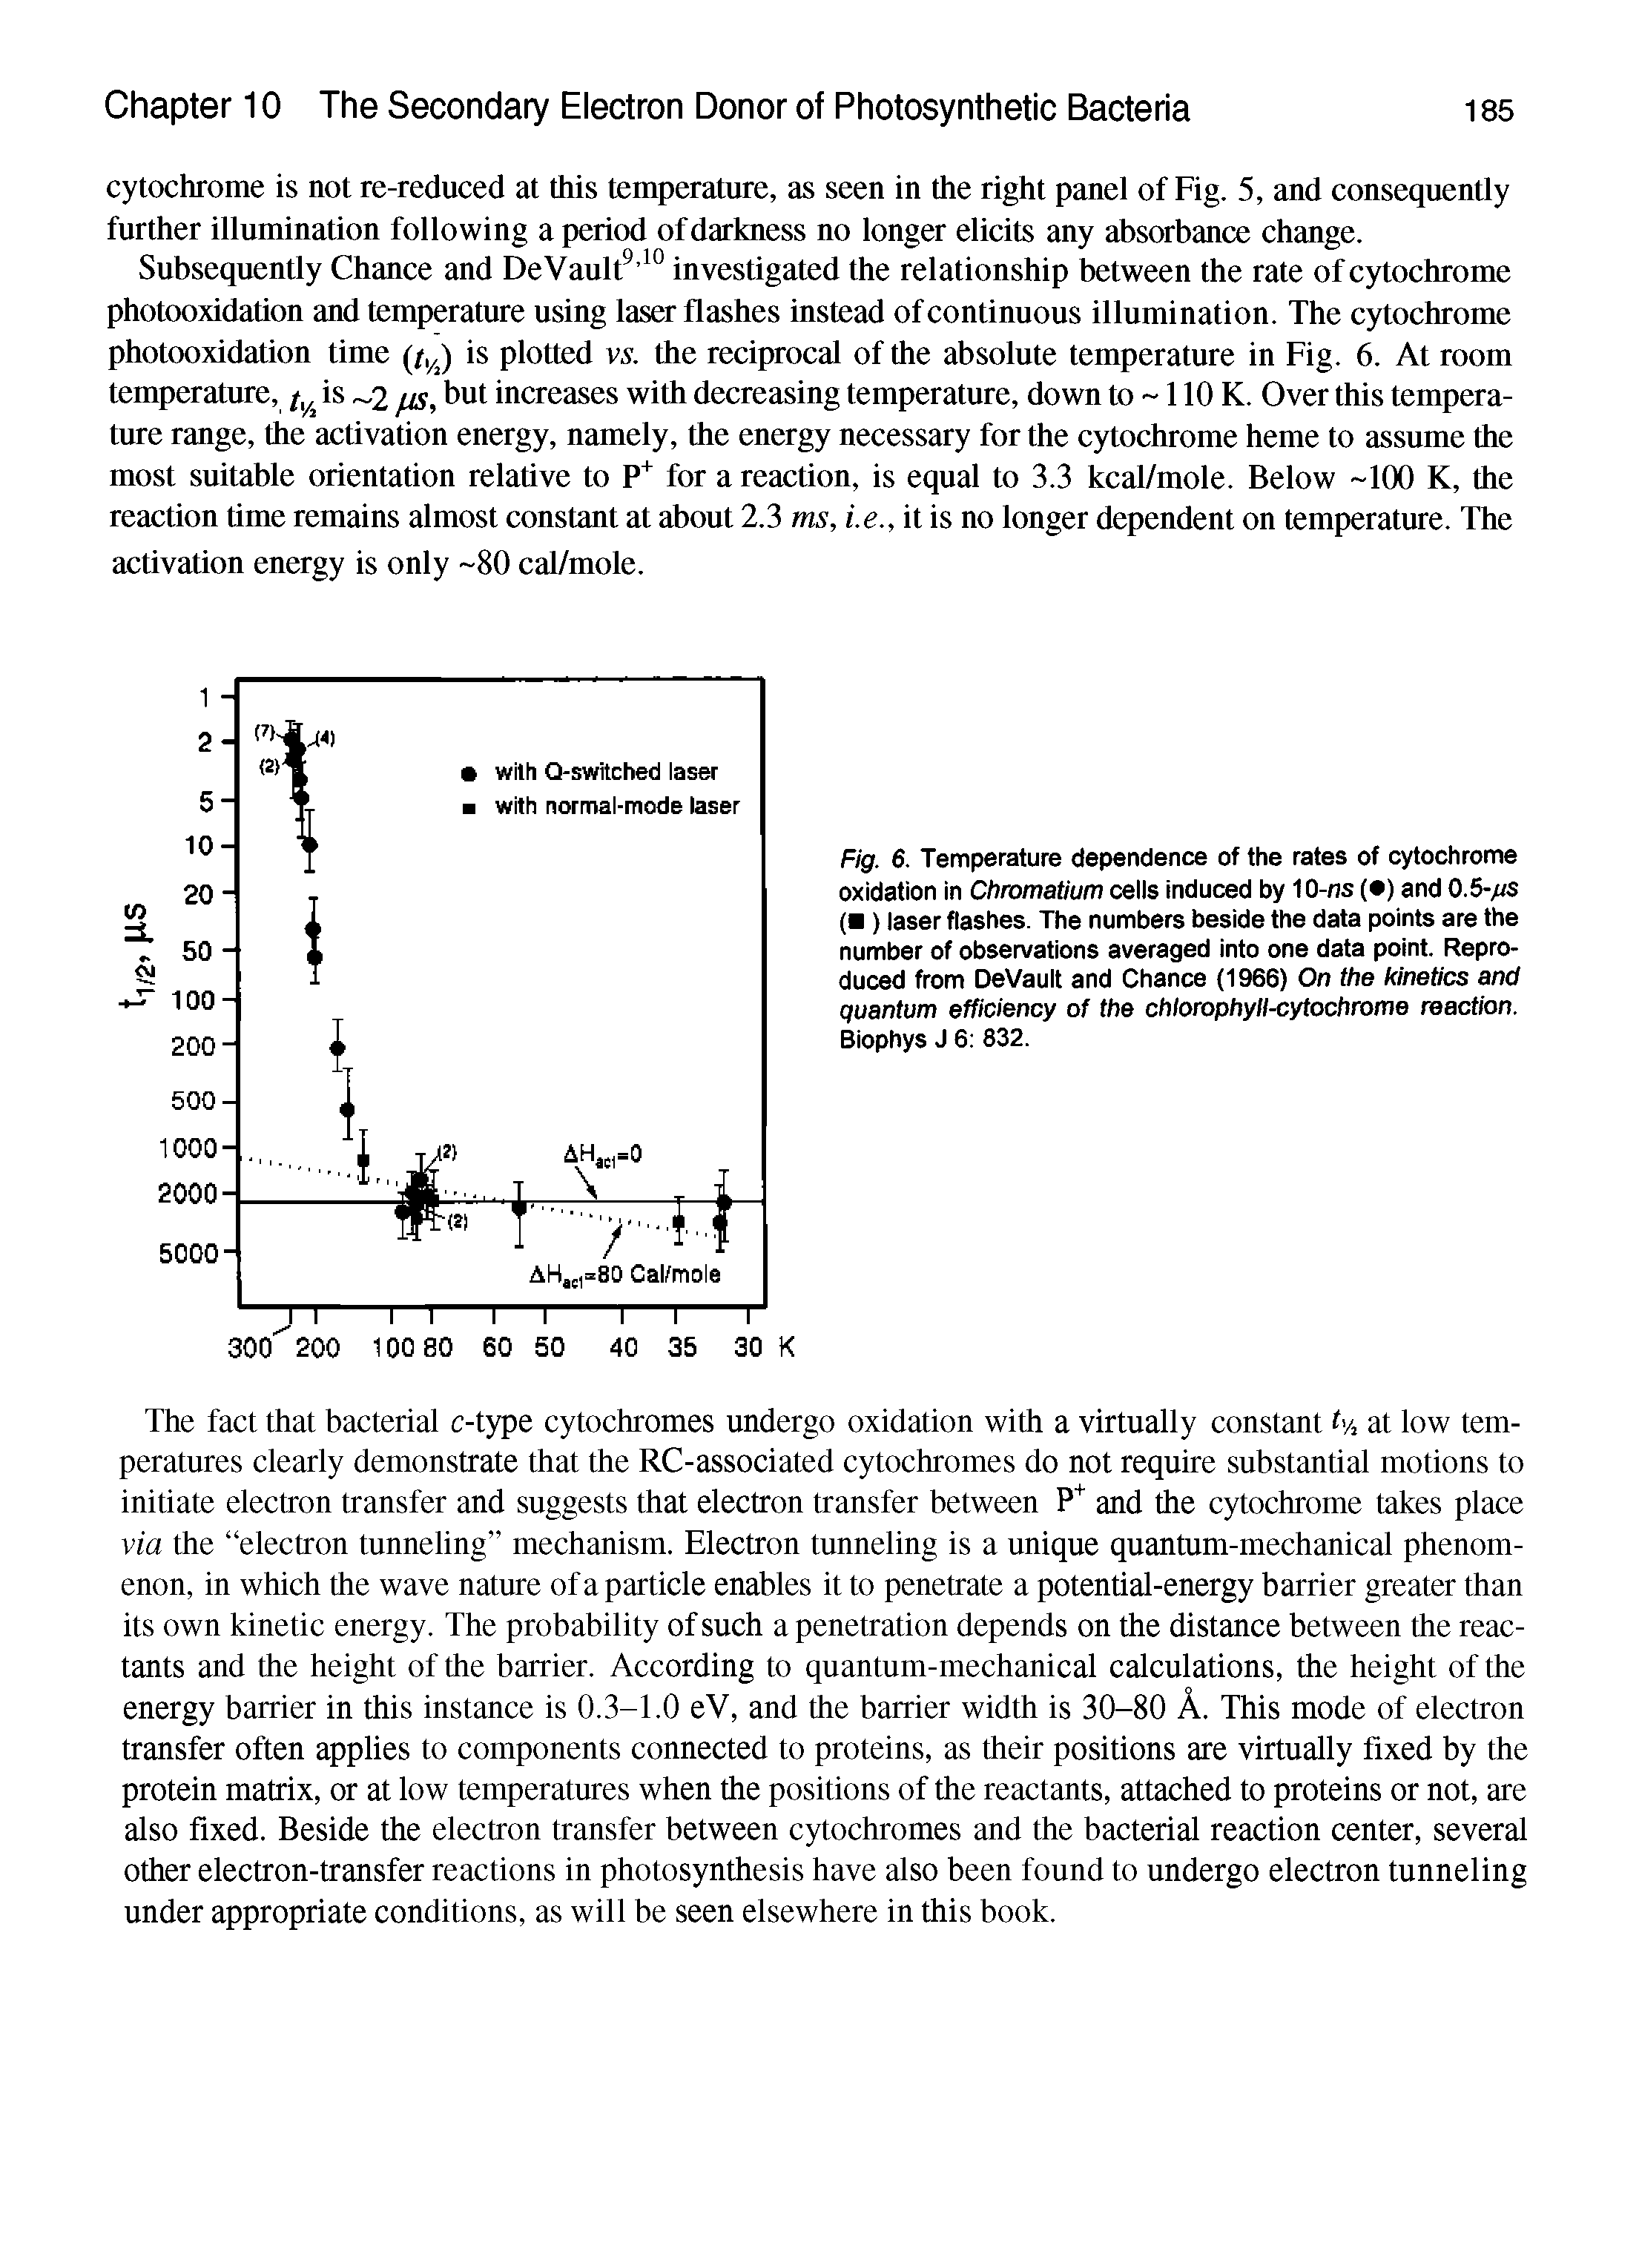 Fig. 6. Temperature dependence of the rates of cytochrome oxidation in Chromatium ceils induced by 10-ns ( ) and 0.5-ms ( ) laser flashes. The numbers beside the data points are the number of observations averaged into one data point. Reproduced from DeVault and Chance (1966) On the kinetics and quantum efficiency of the chlorophyll-cytochrome reaction. Biophys J 6 832.